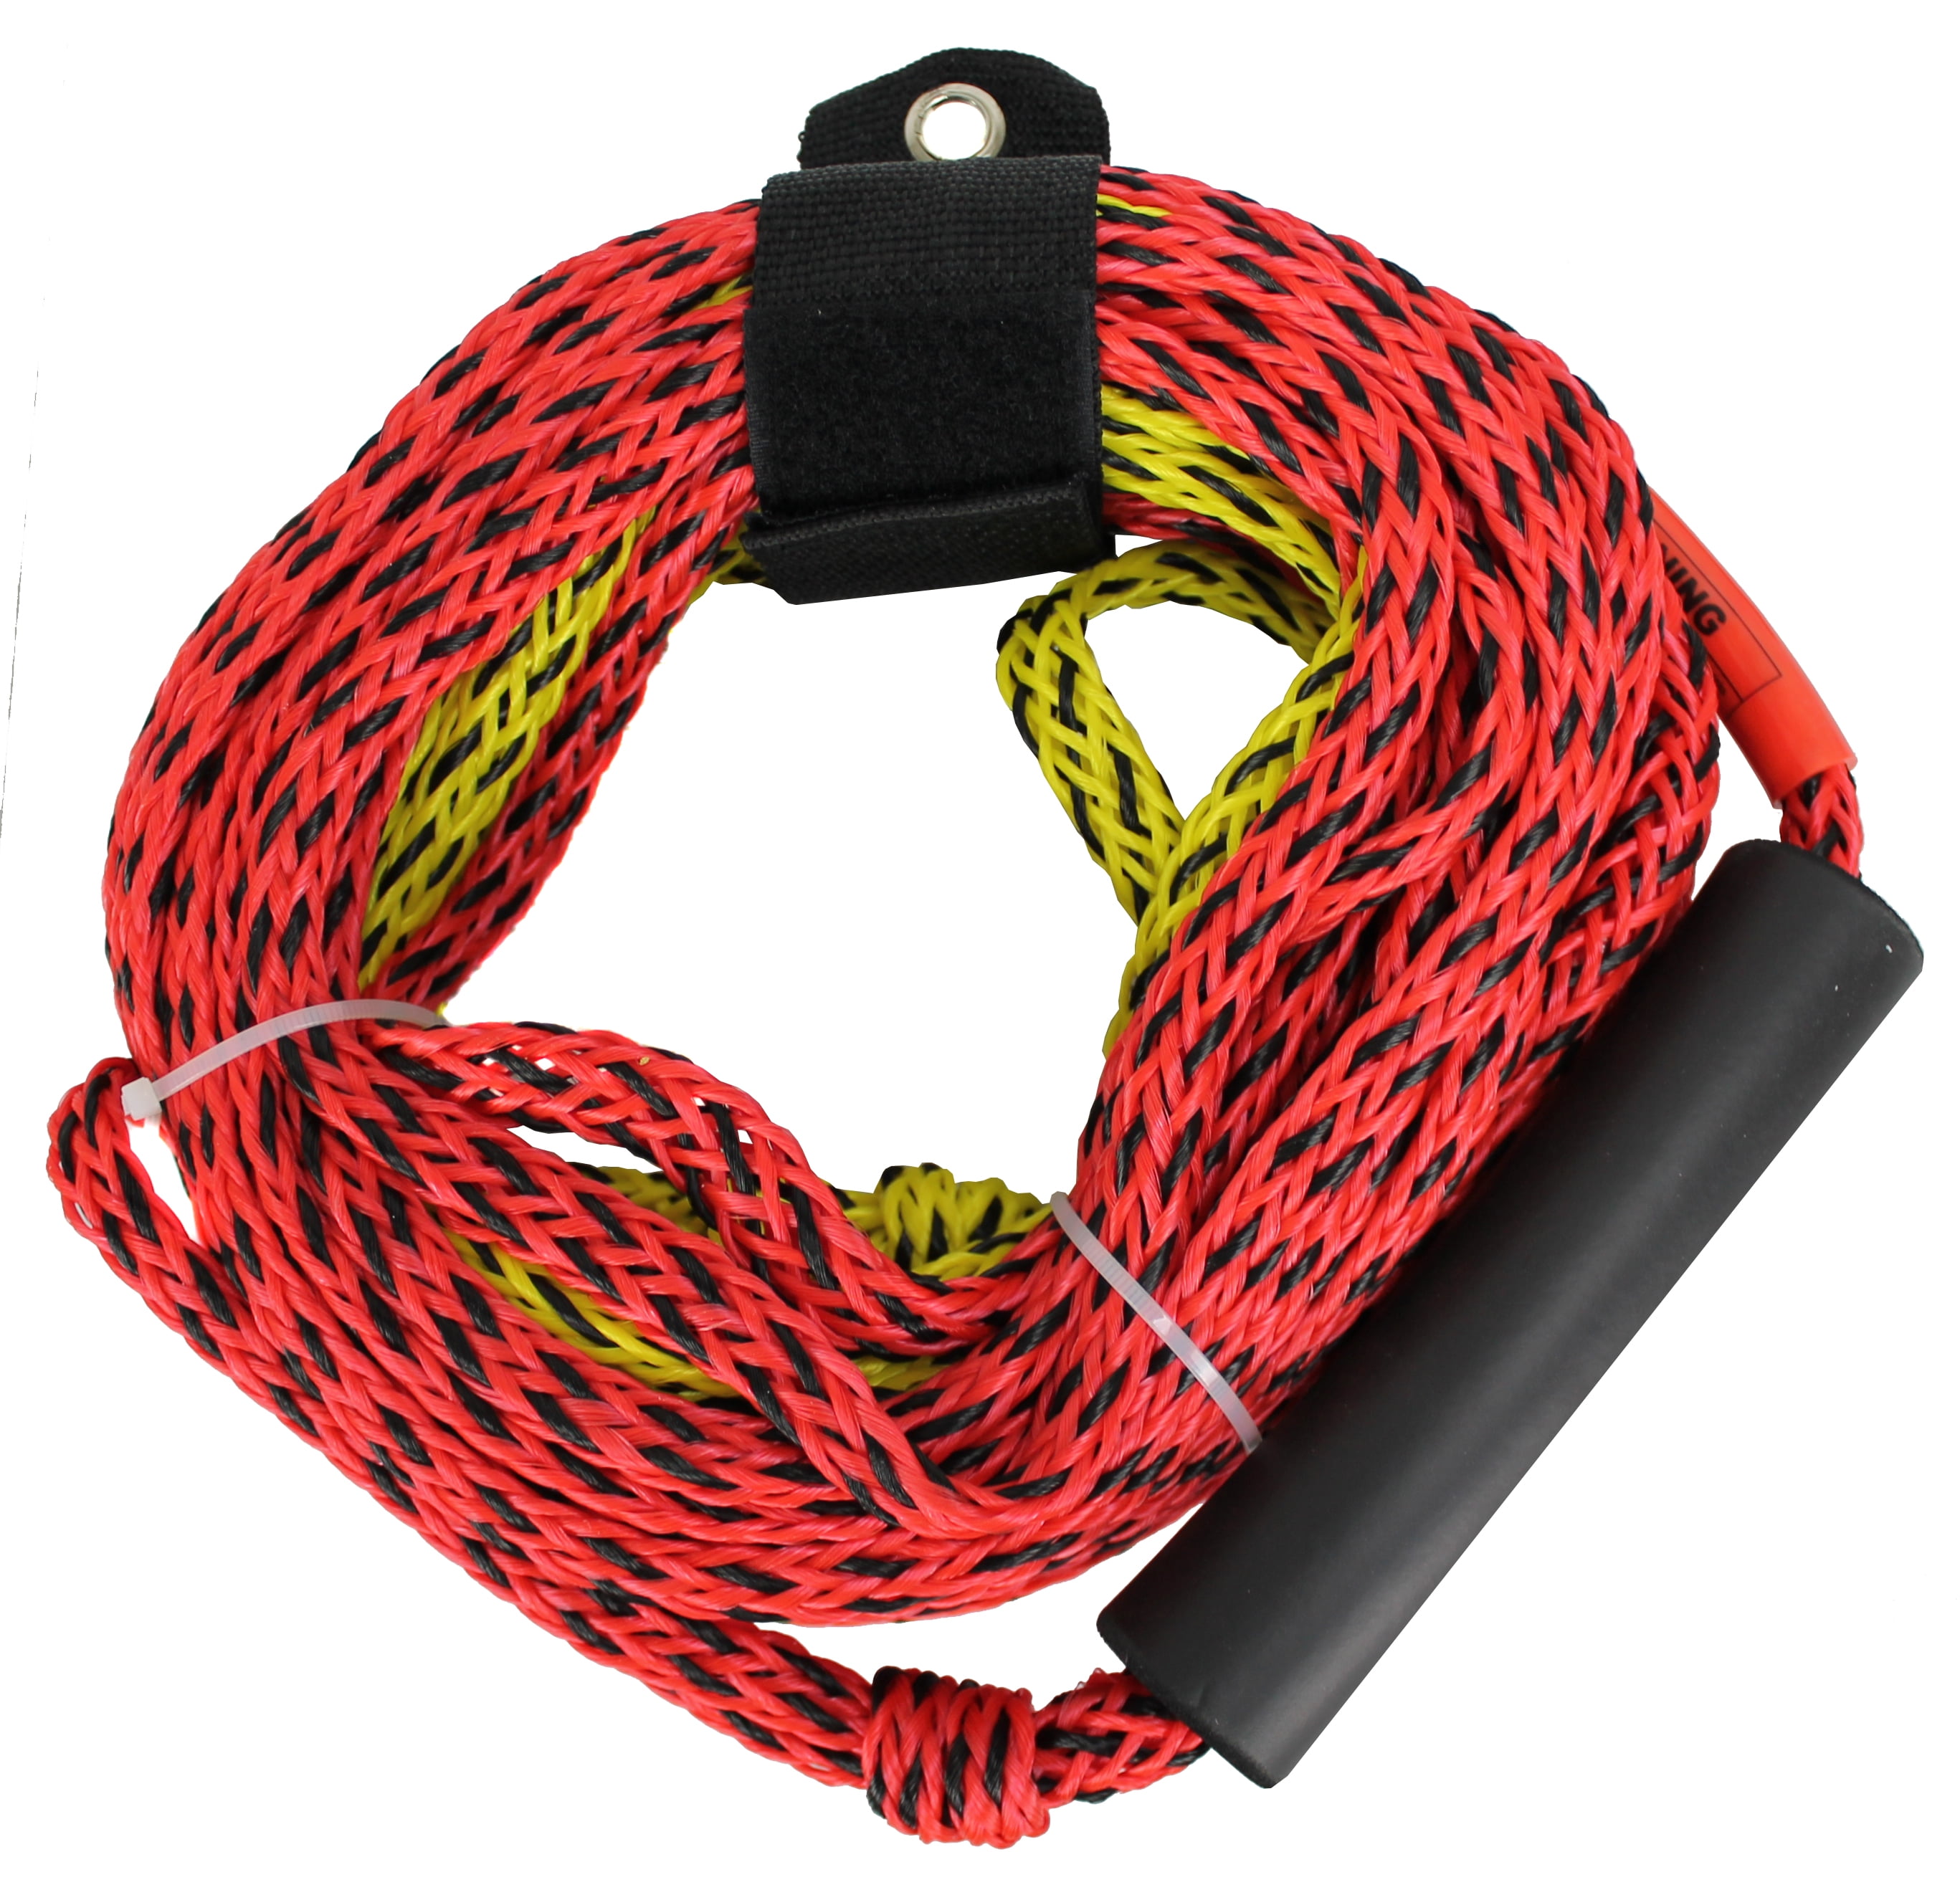 Tube Tow Rope 2 Rider Two Section Float Tubing Water Sports Towable Airhead 